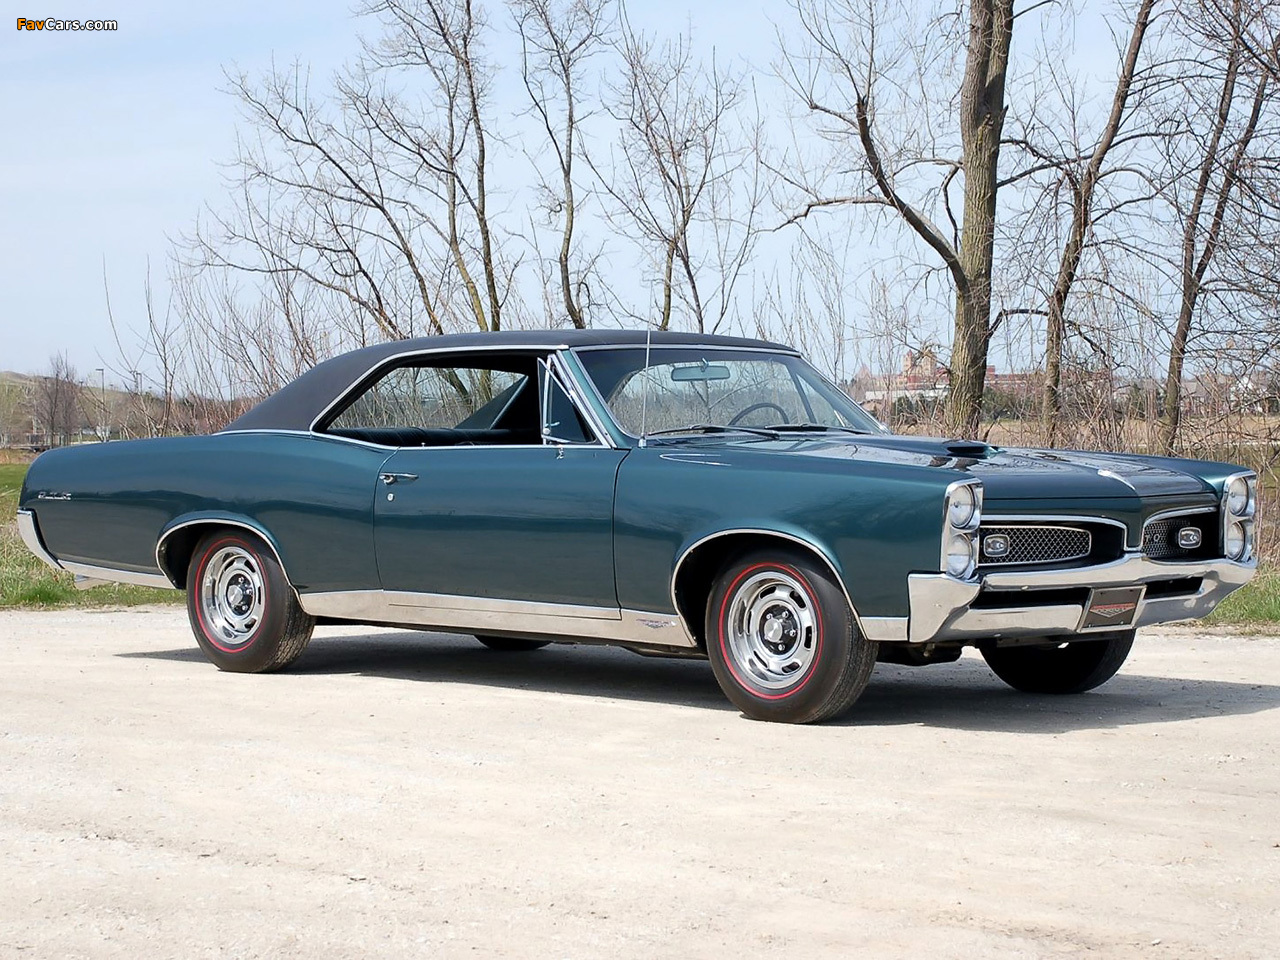 Pictures of Pontiac Tempest GTO Hardtop Coupe 1967 (1280 x 960)